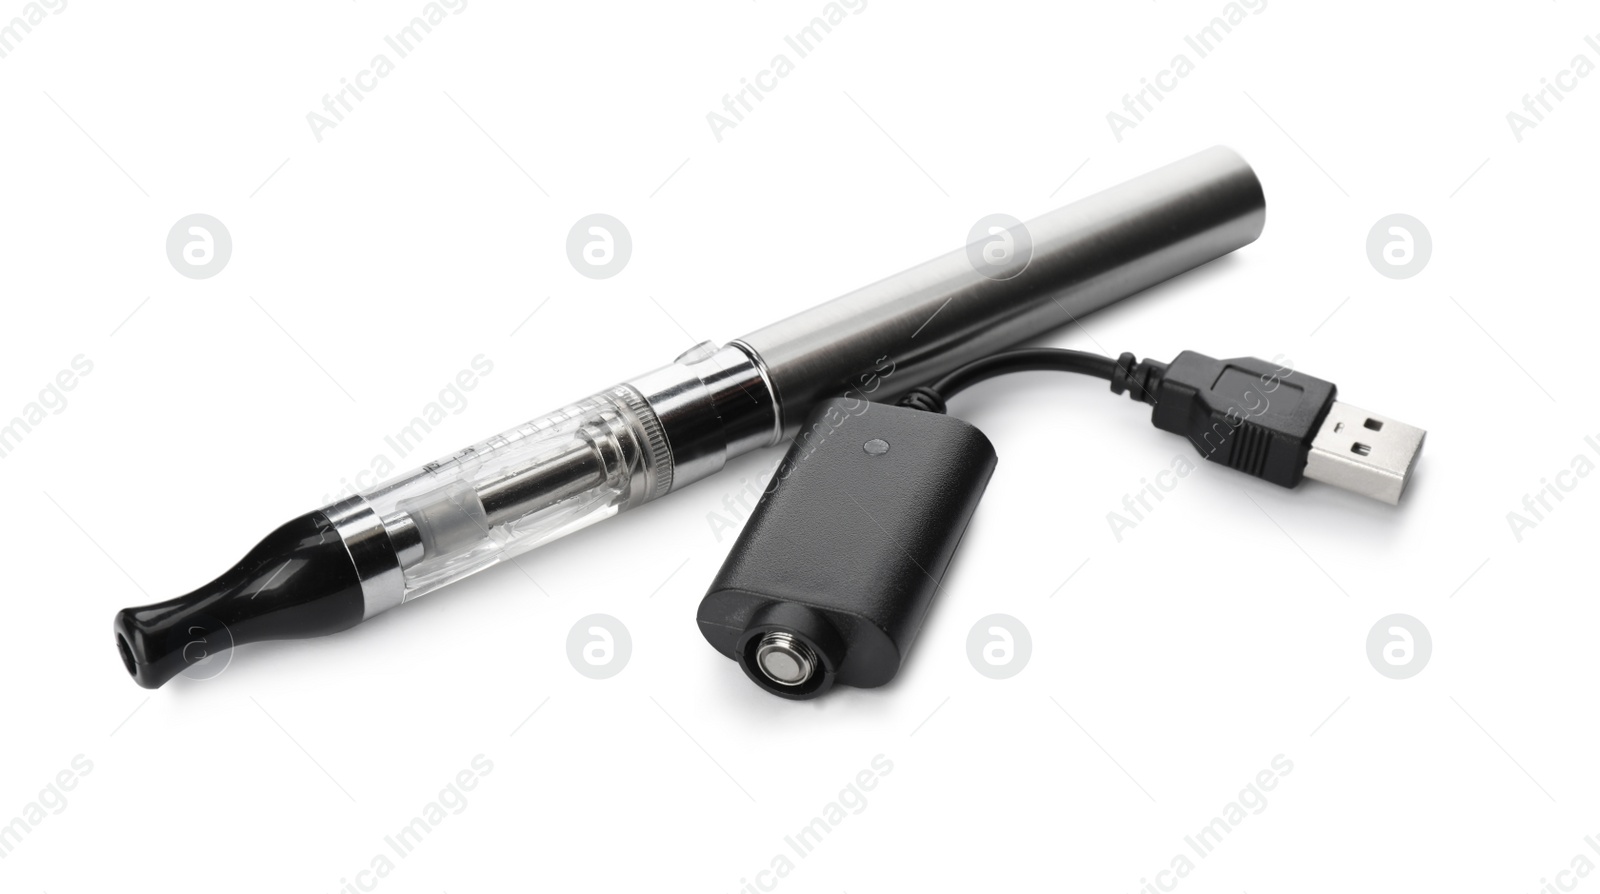 Photo of Electronic smoking device and charger on white background